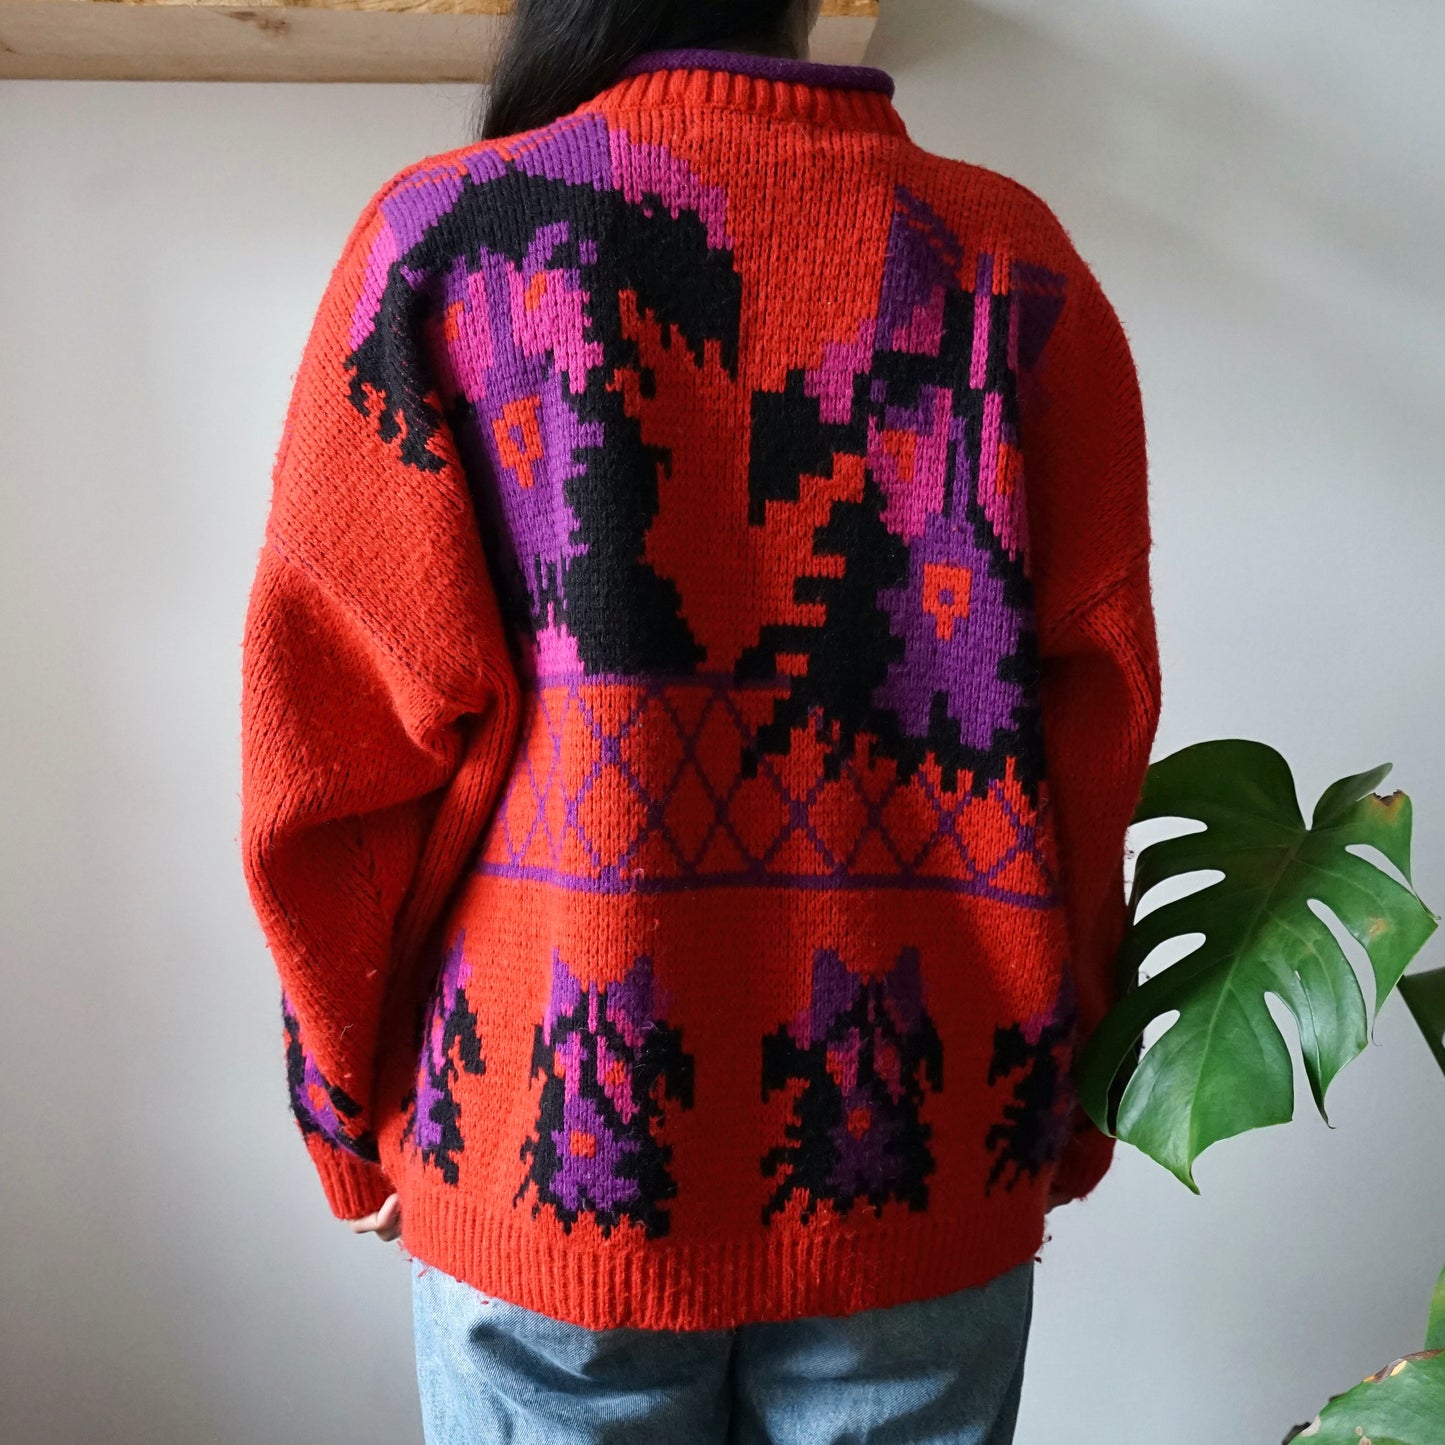 Vintage red Pullover Size M-L embroidery details